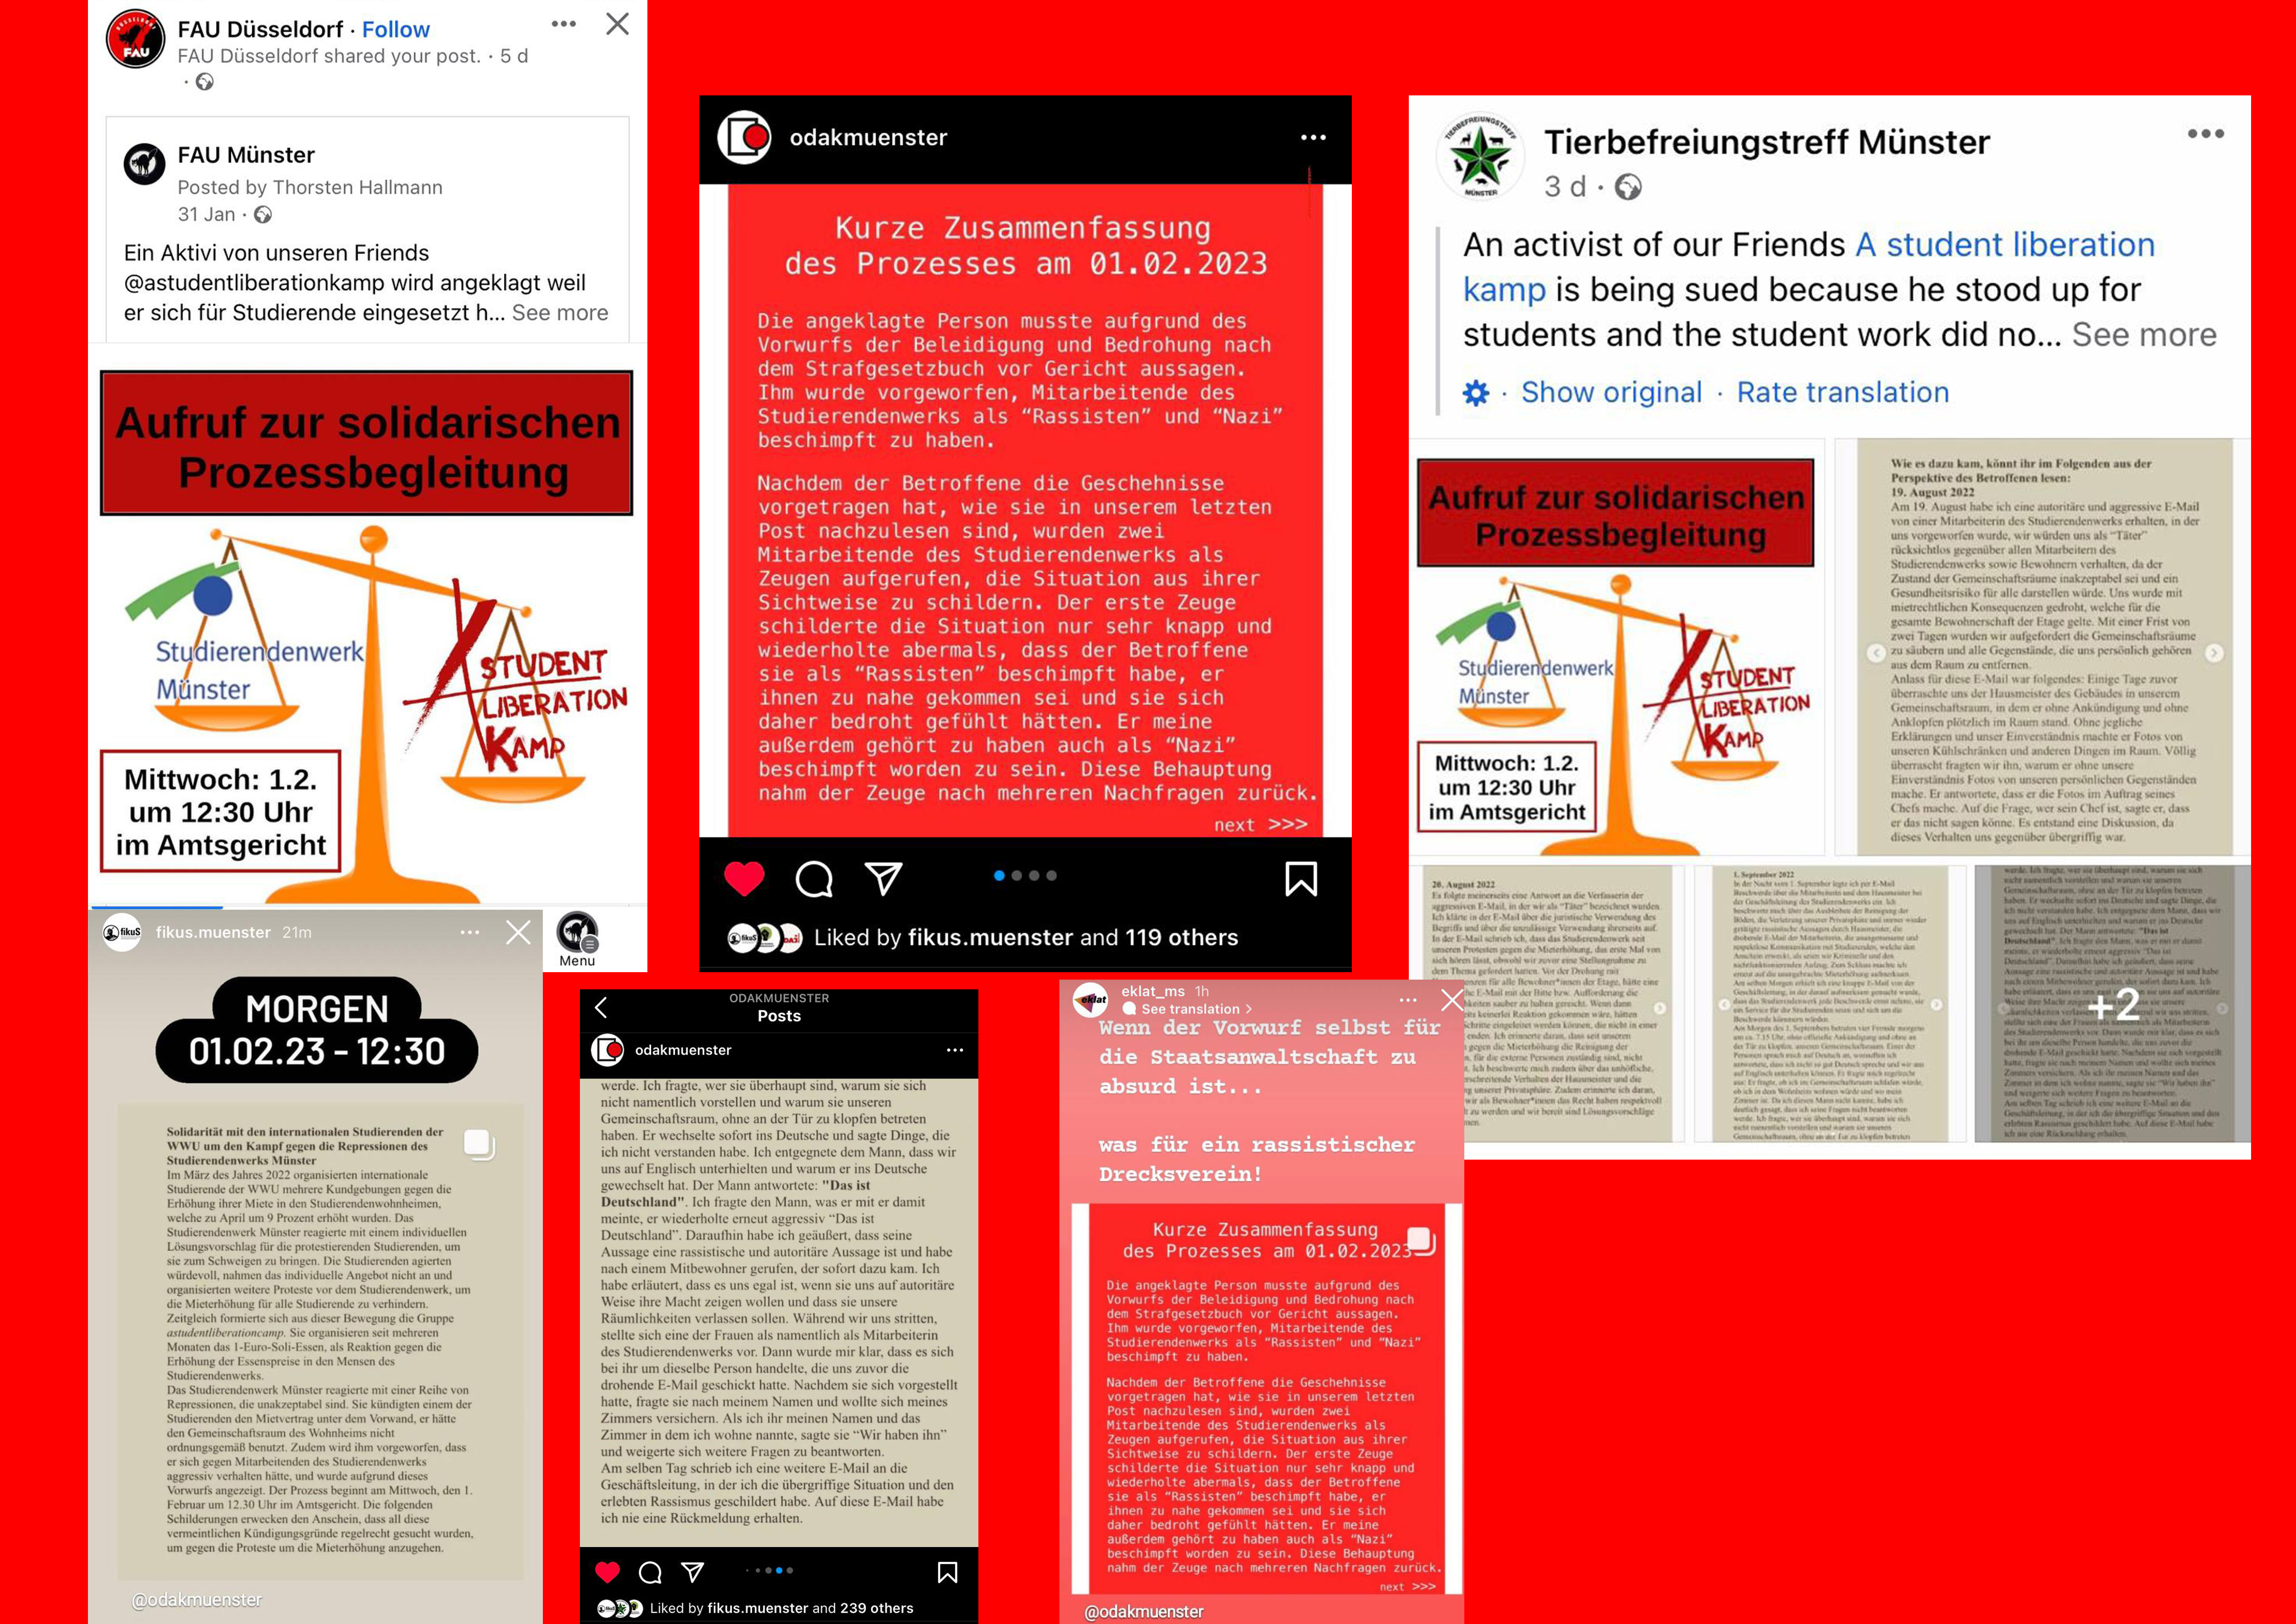 Social media posts of different political groups about the public hearing of 1st February 2023.